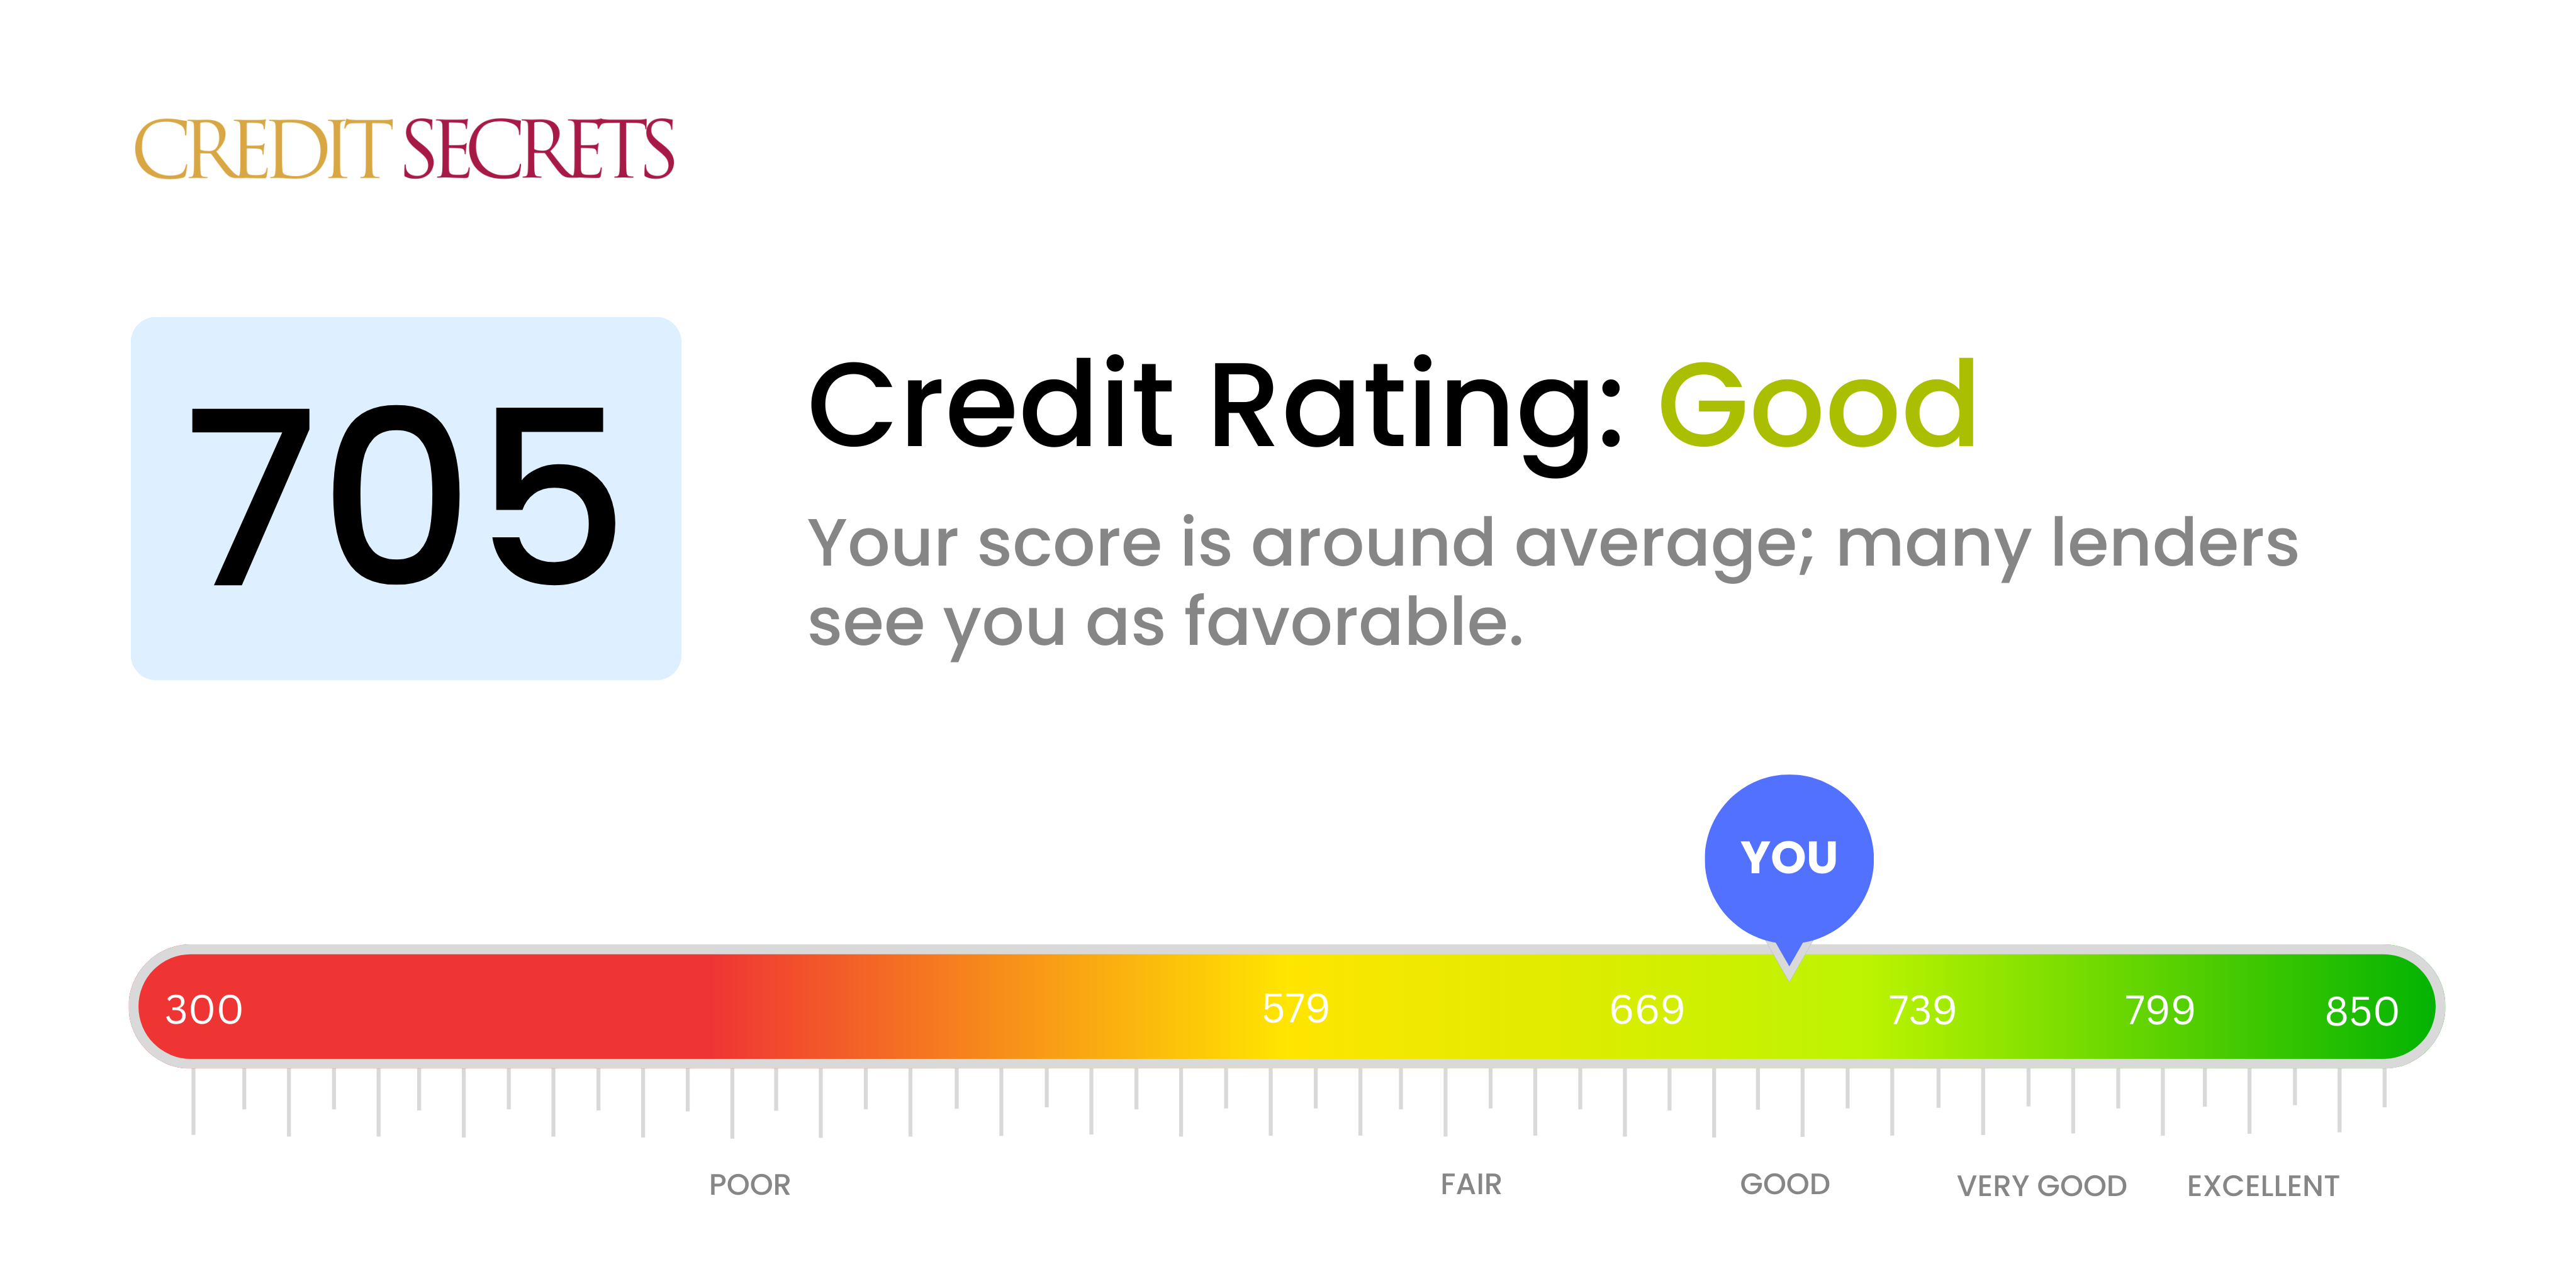 Is 705 a good credit score?